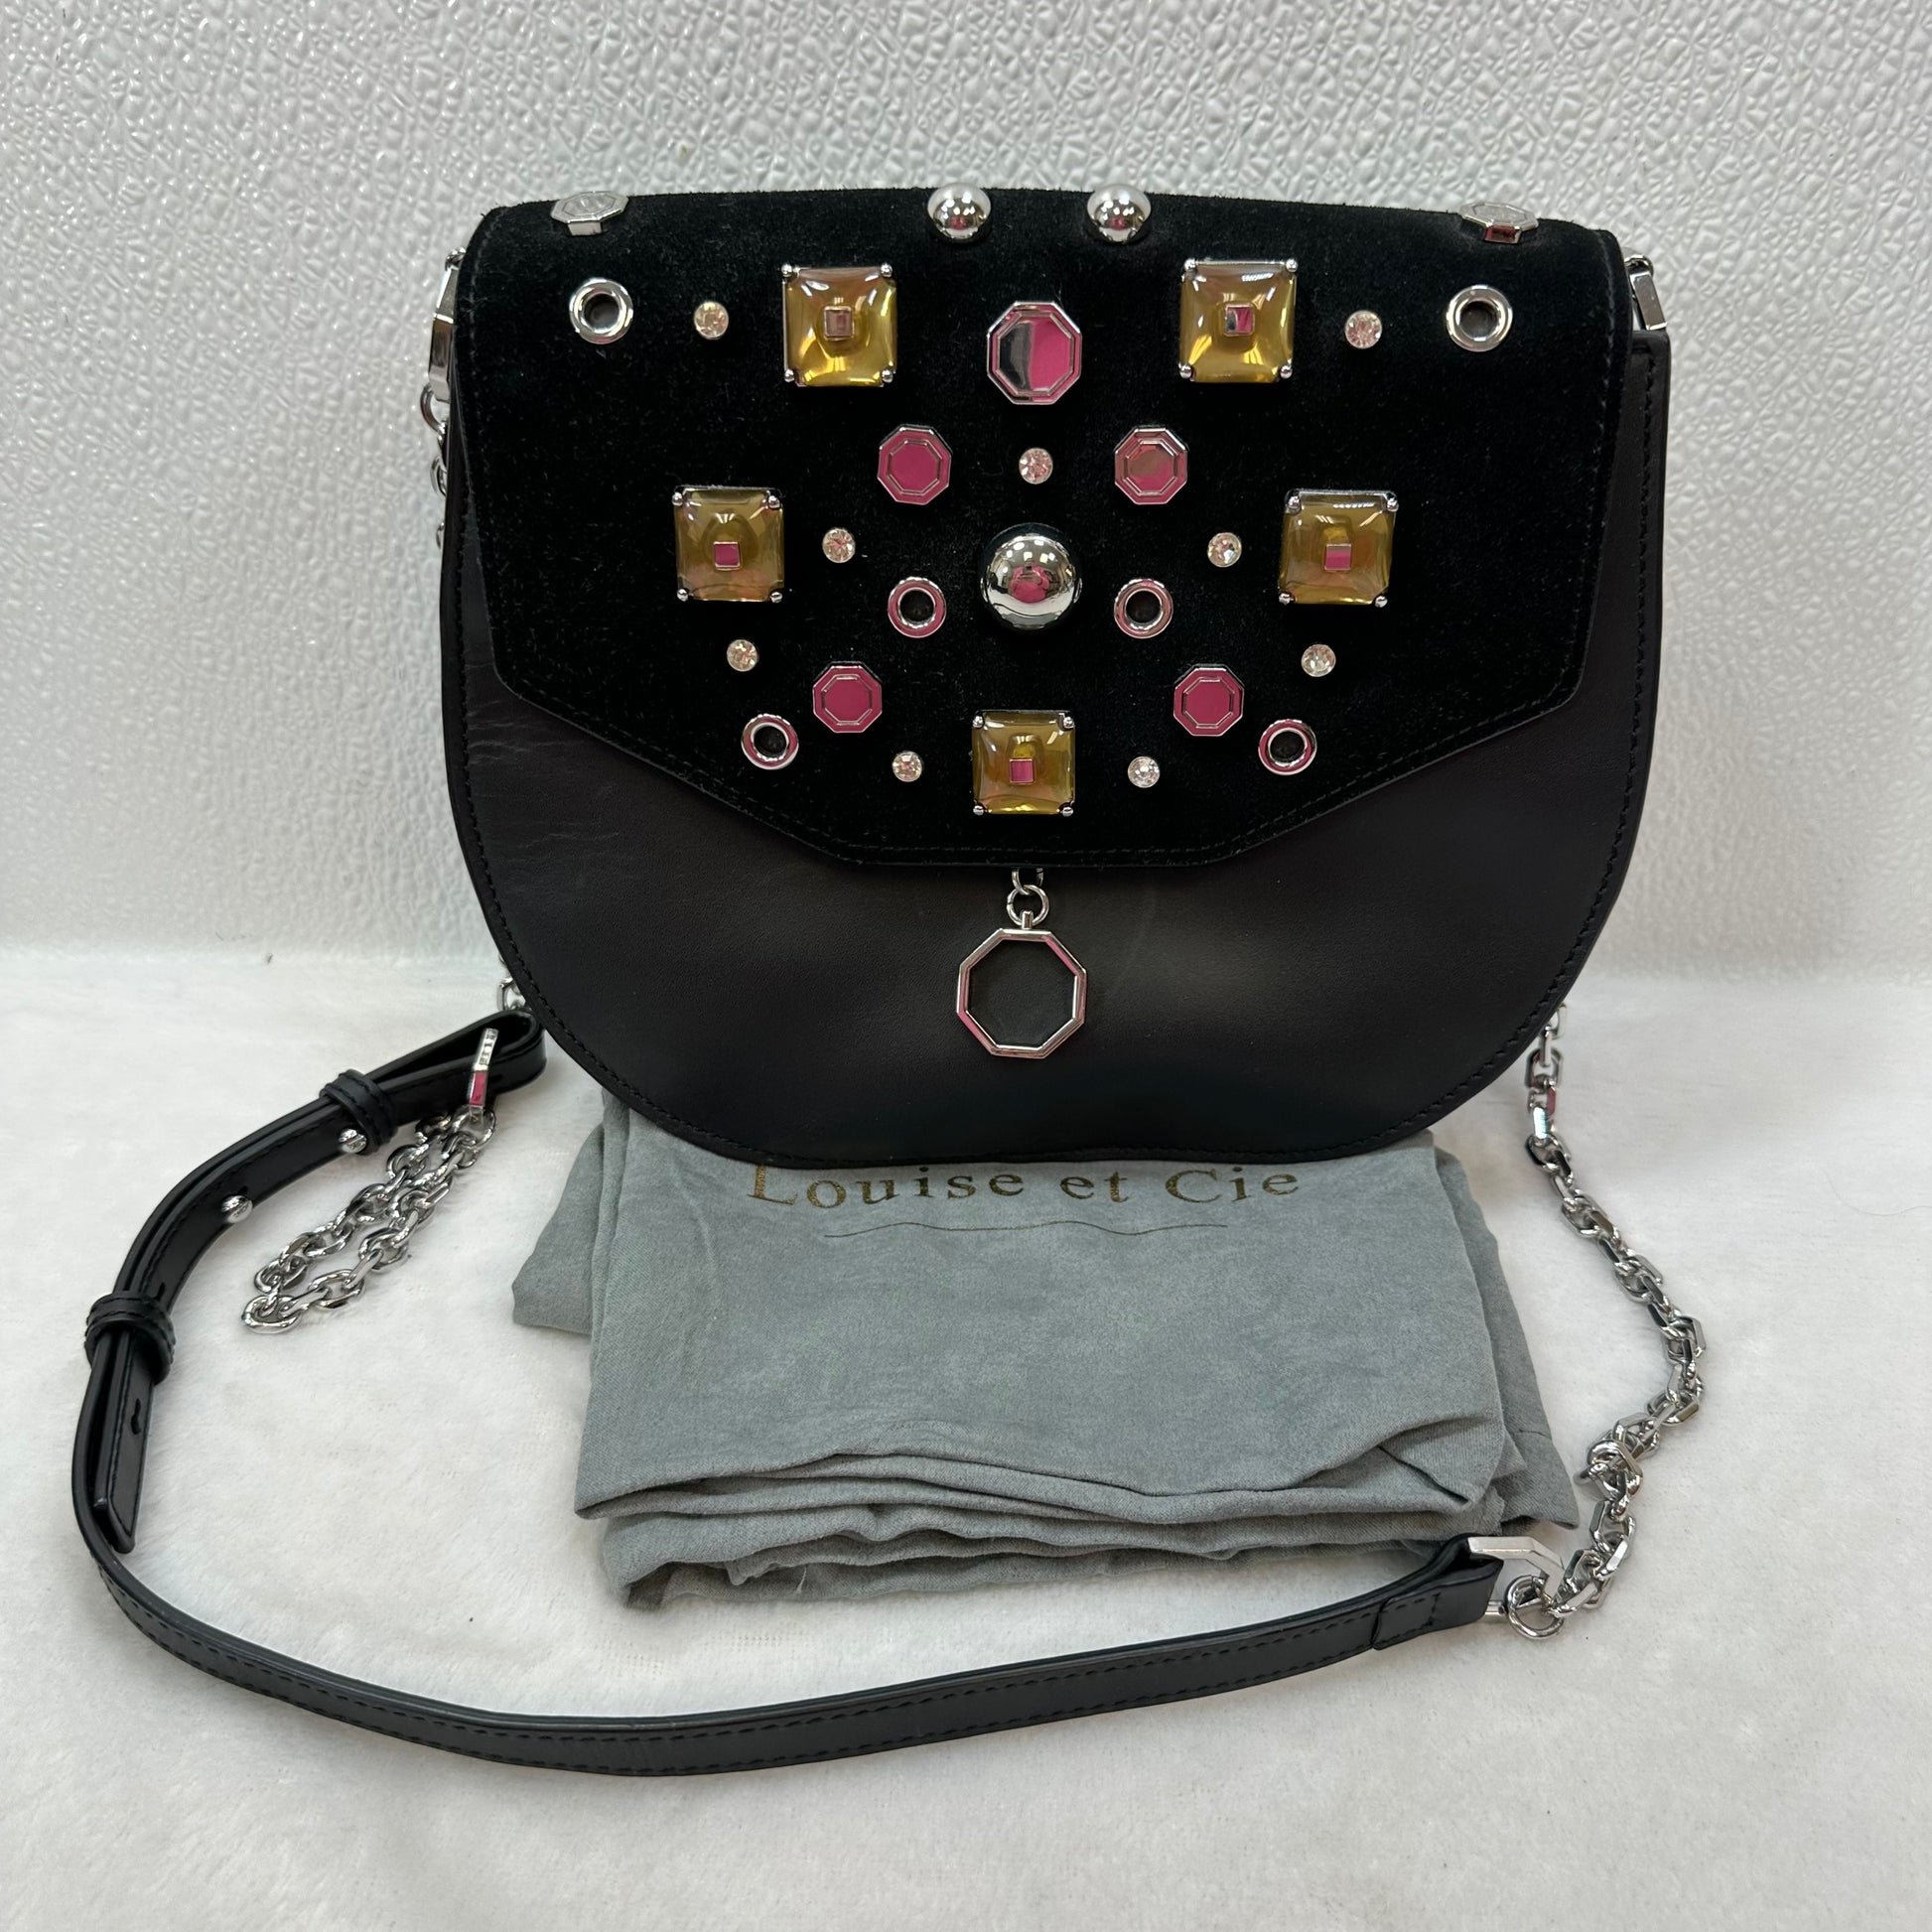 Handbag By Louise Et Cie Size: Small